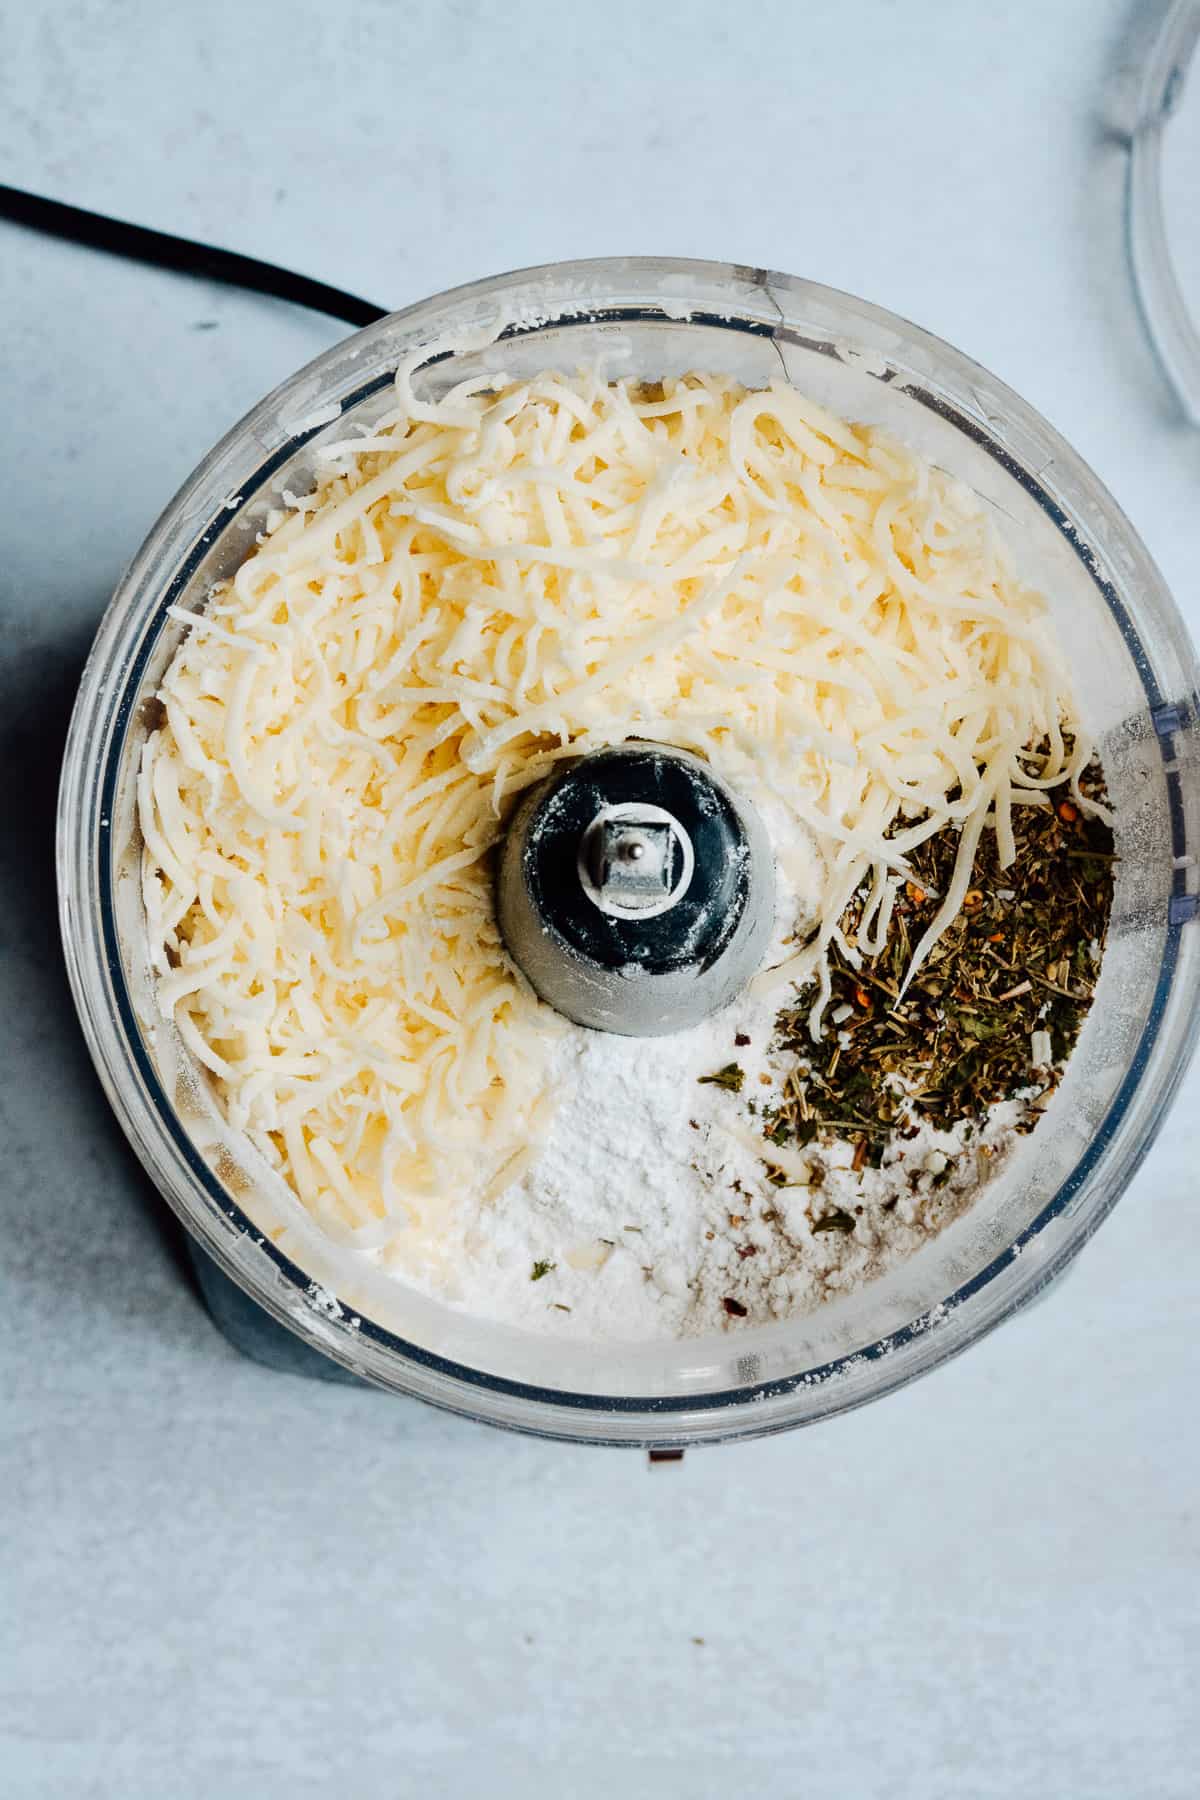 Flour, cheese and herbs in a food processor.